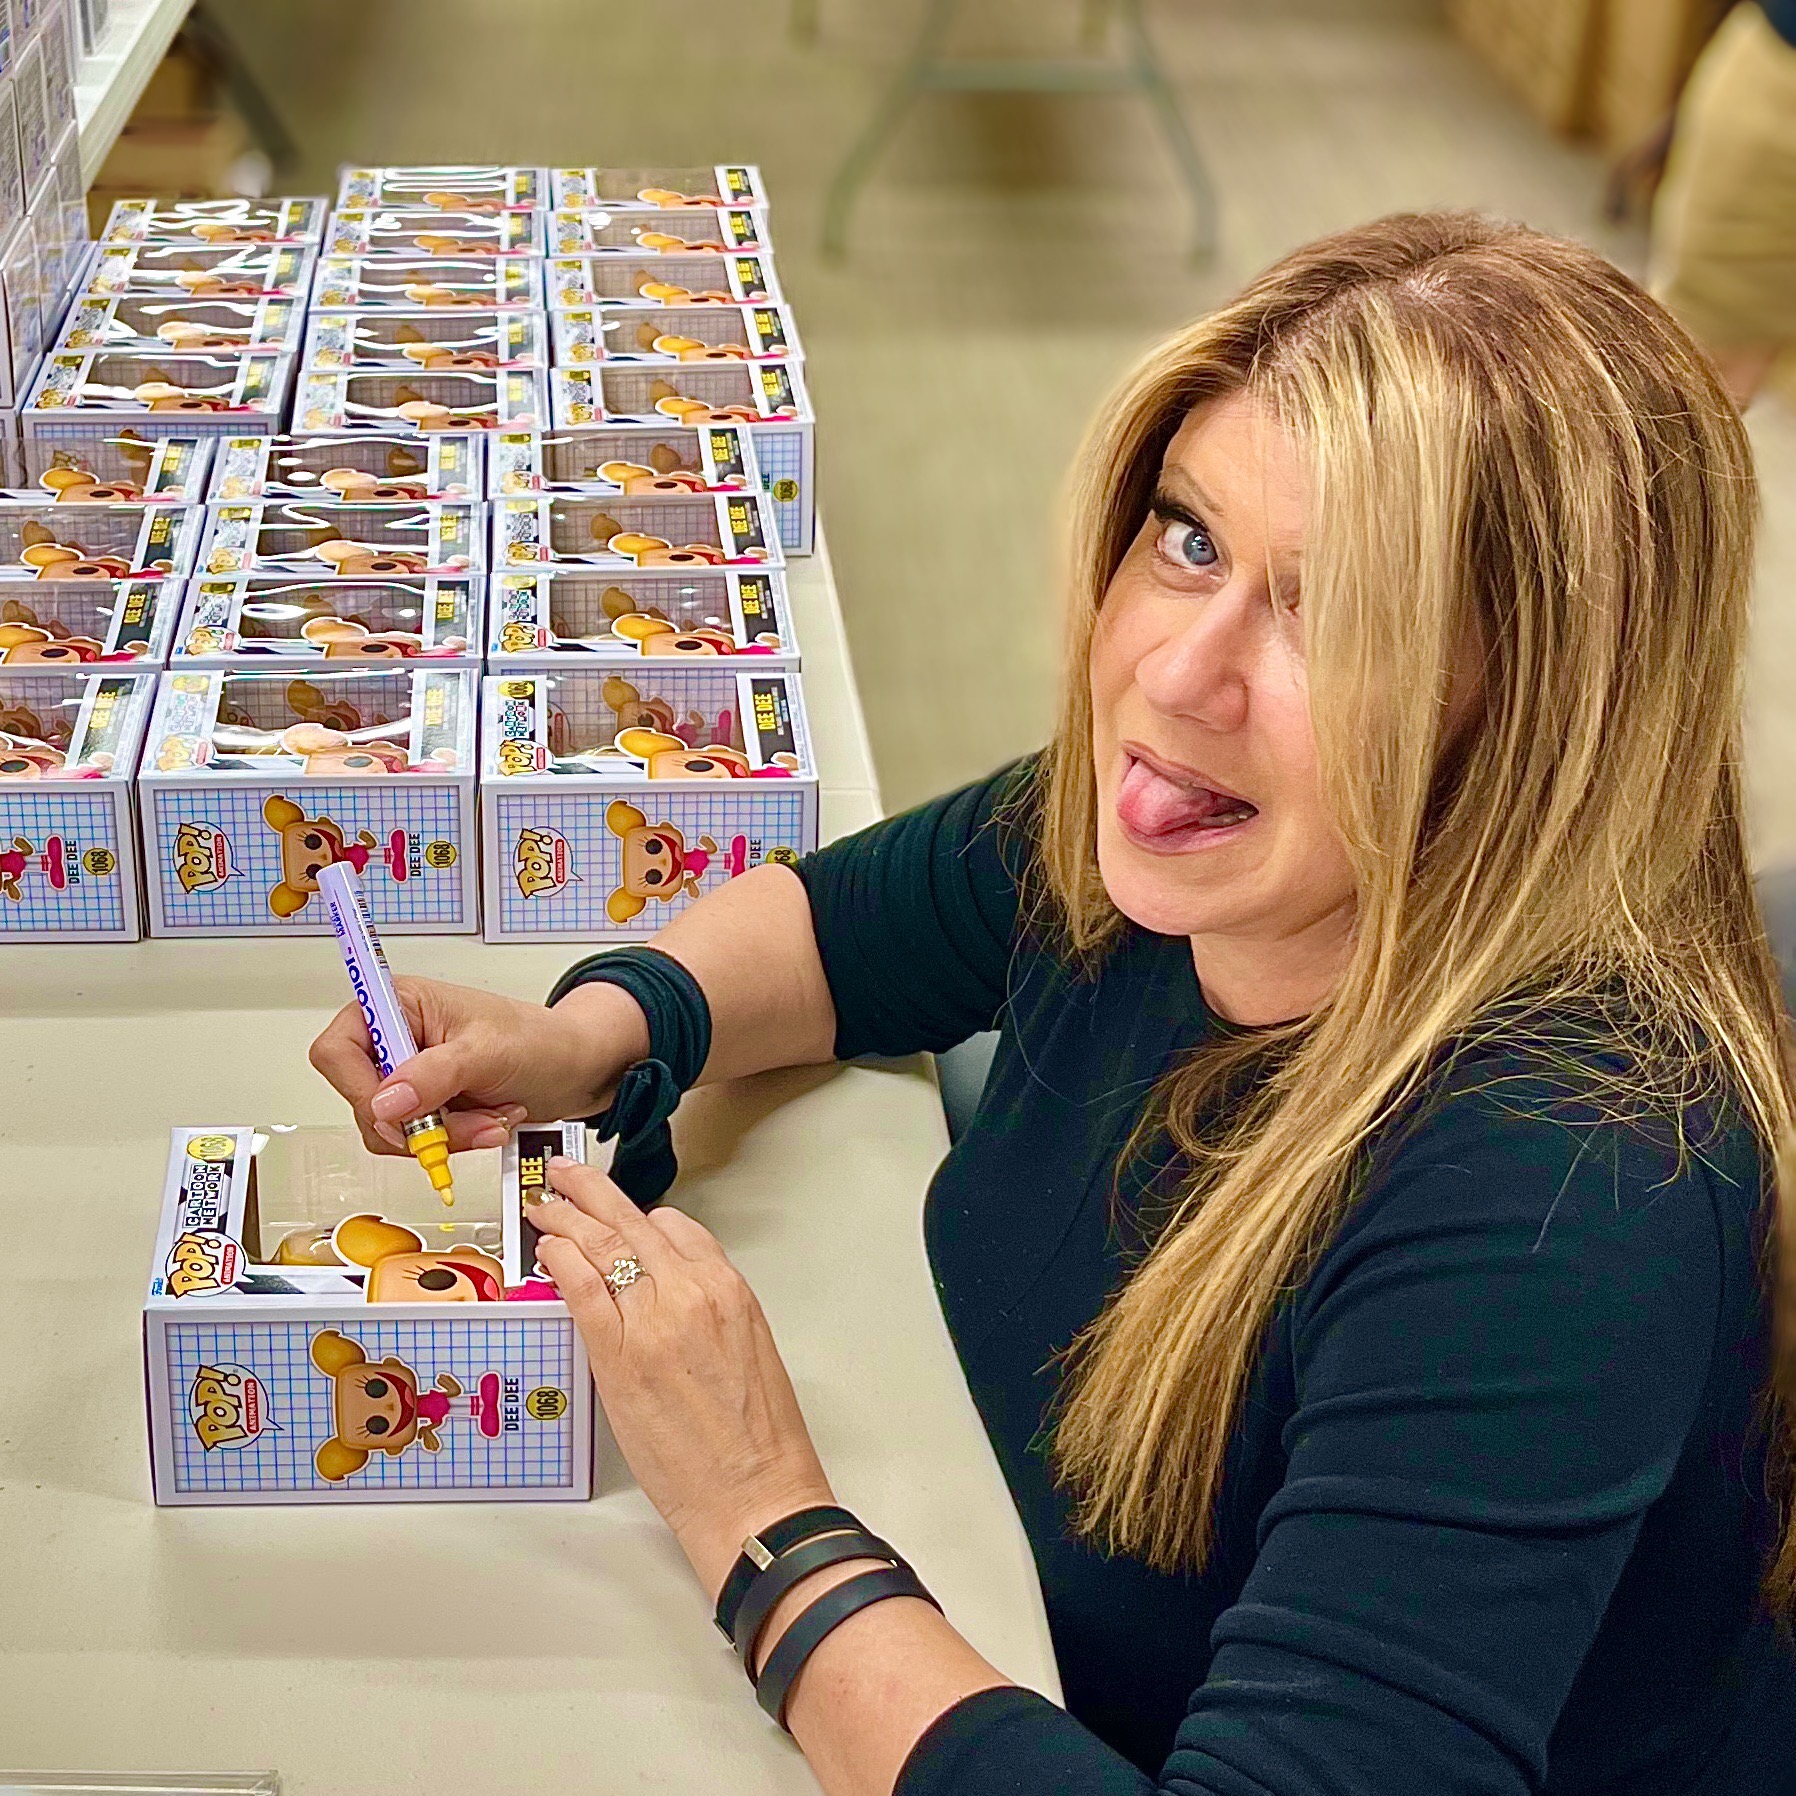 Kat Cressida at fan Funko Pop signing event at Chalice Collectibles autographing hundreds of Dexter’s Laboratory collectibles